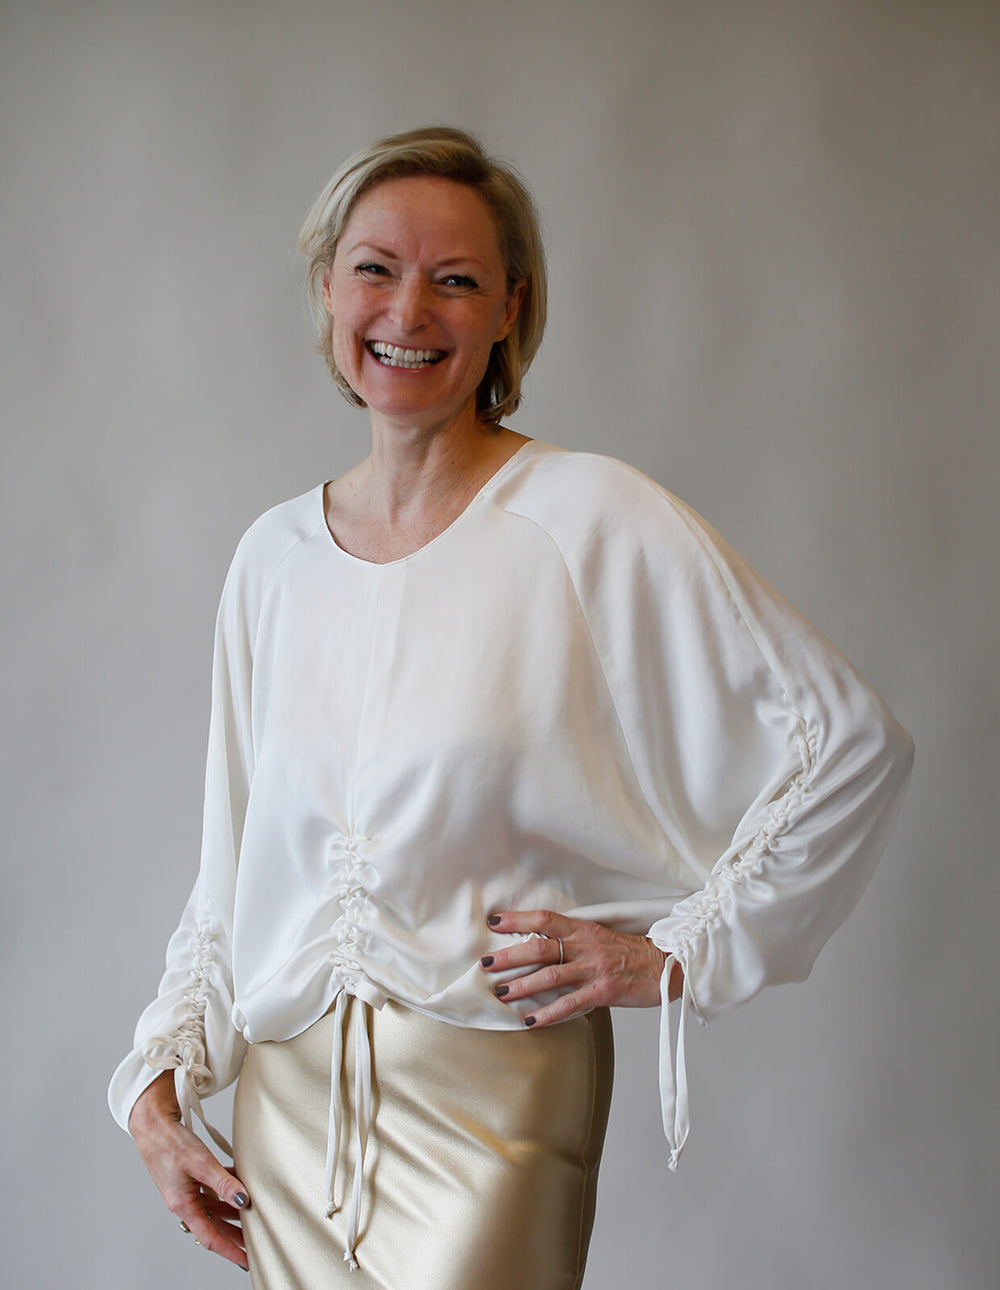 Woman wearing Tie Detail Top sewing pattern from The Maker's Atelier on The Fold Line. A blouse pattern made in tencel, viscose, silks, or soft cotton fabrics, featuring bat wing raglan sleeves, ruched gathers on the front and sleeves, round neck and rela